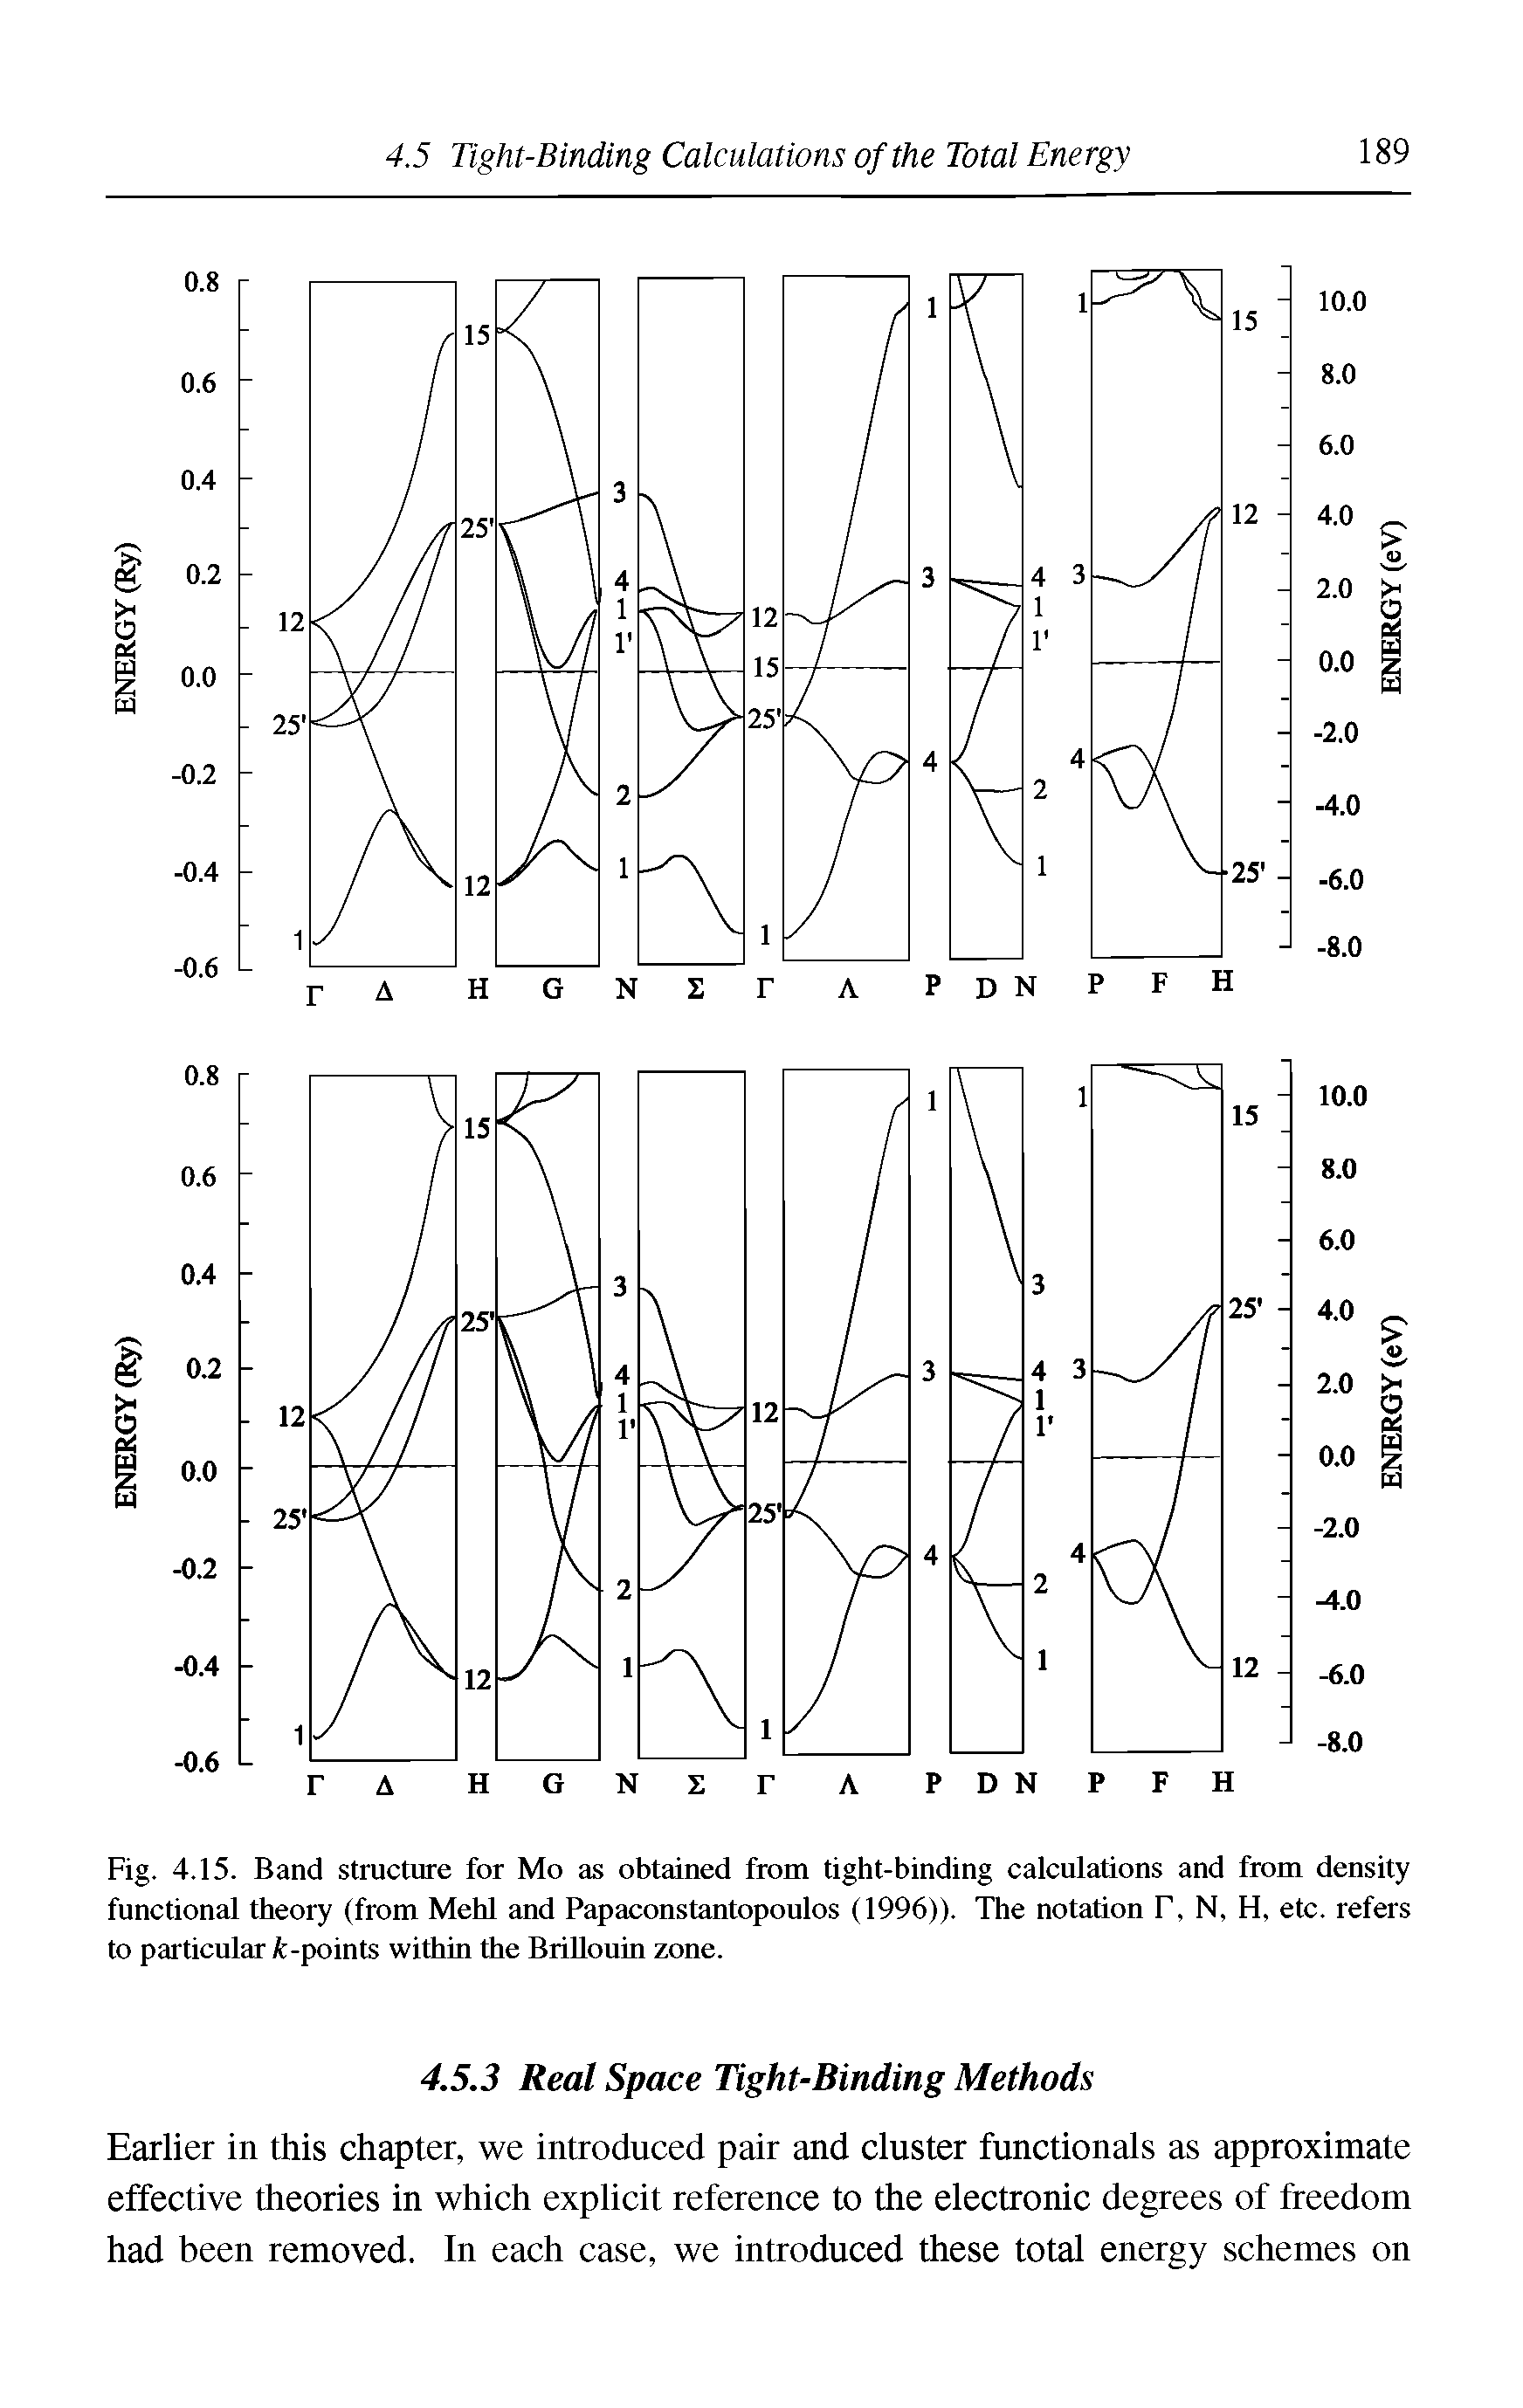 Fig. 4.15. Band structure for Mo as obtained from tight-binding calculations and from density functional theory (from Mehl and Papaconstantopoulos (1996)). The notation F, N, H, etc. refers to particular i-points within the BriUourn zone.